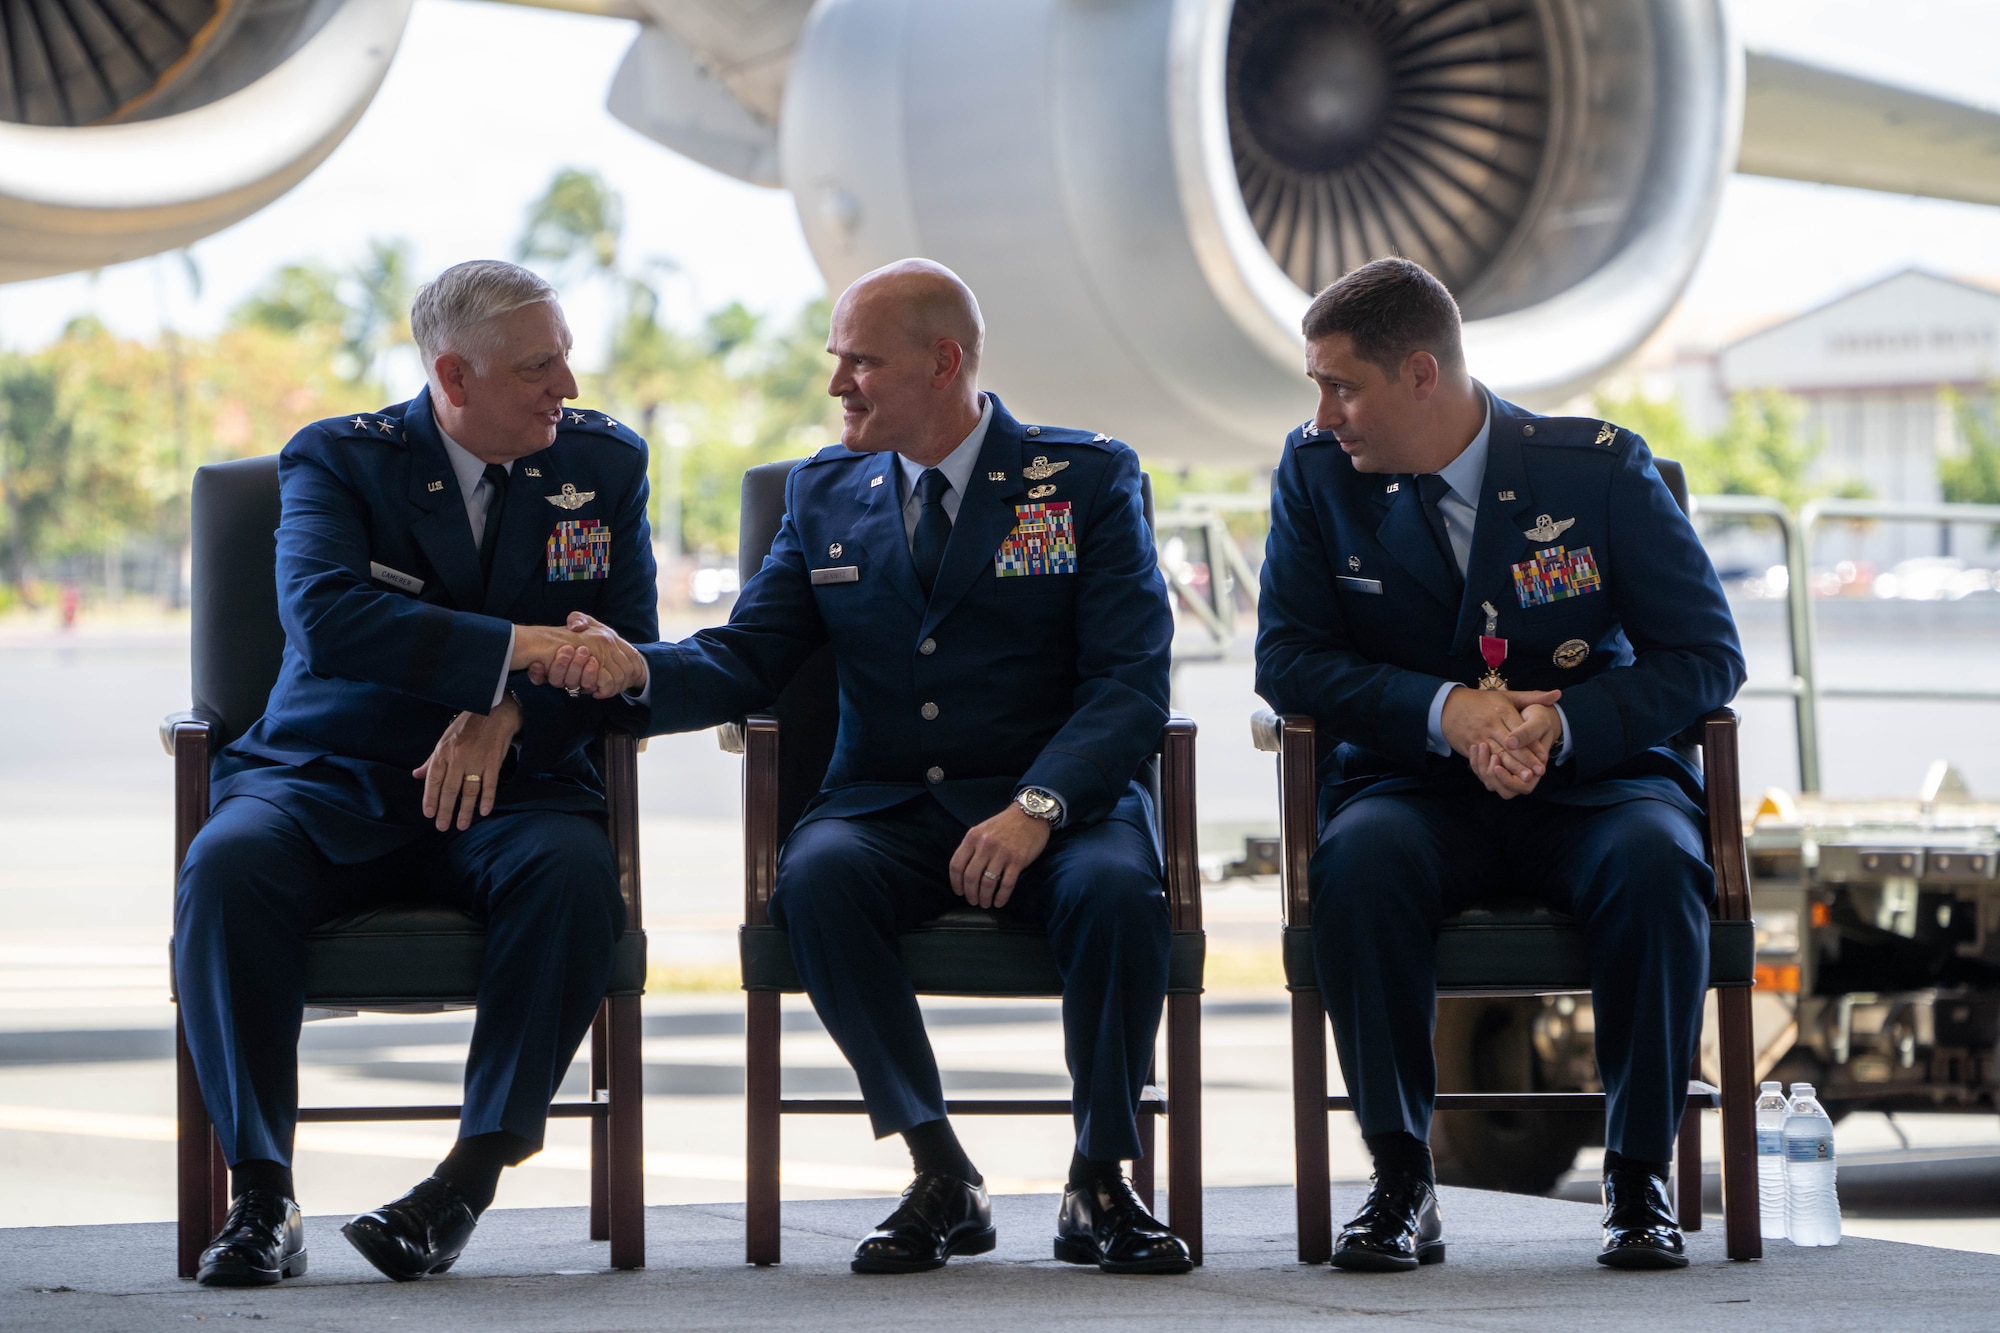 U.S. Air Force Maj. Gen. Mark D. Camerer, left, U.S. Air Force Expeditionary Center commander, shakes hands with Col. Kyle A. Benwitz, 515th Air Mobility Operations Wing commander, while joined on stage by Col. Dan Cooley, former 515th AMOW commander, during a change of command ceremony June 28, 2022.